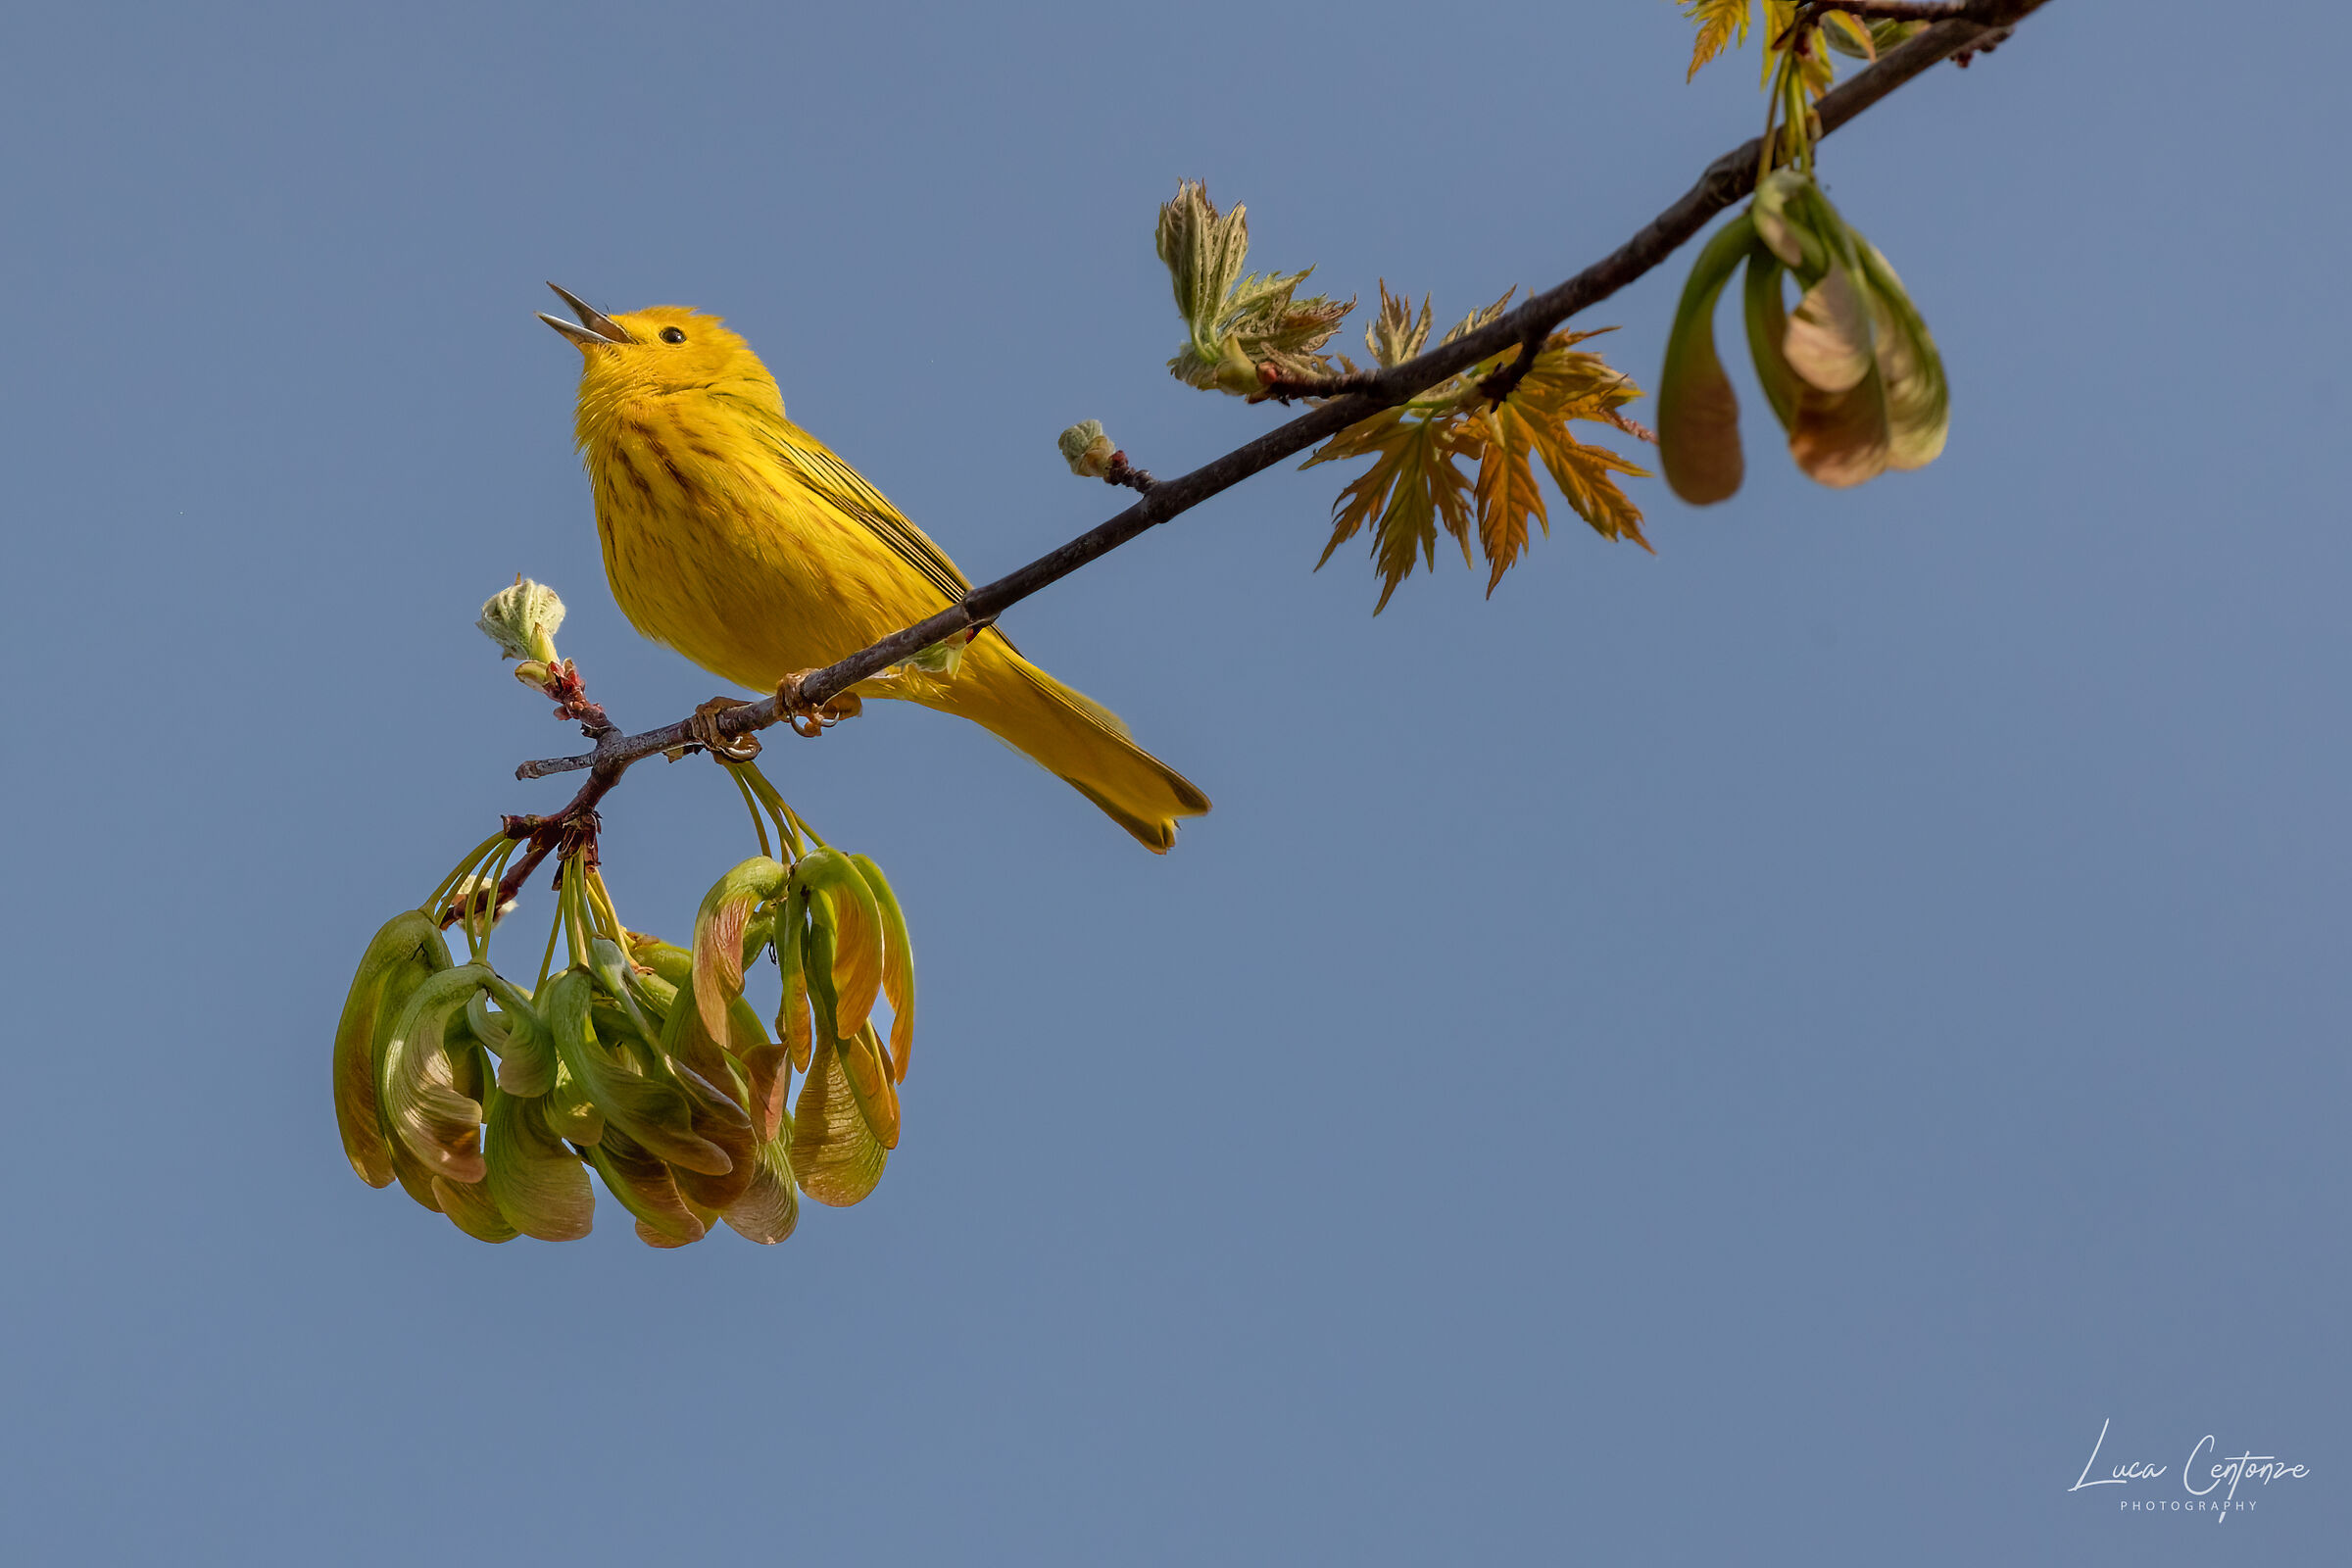 And what a yellow it is! (Yellow Warbler)...